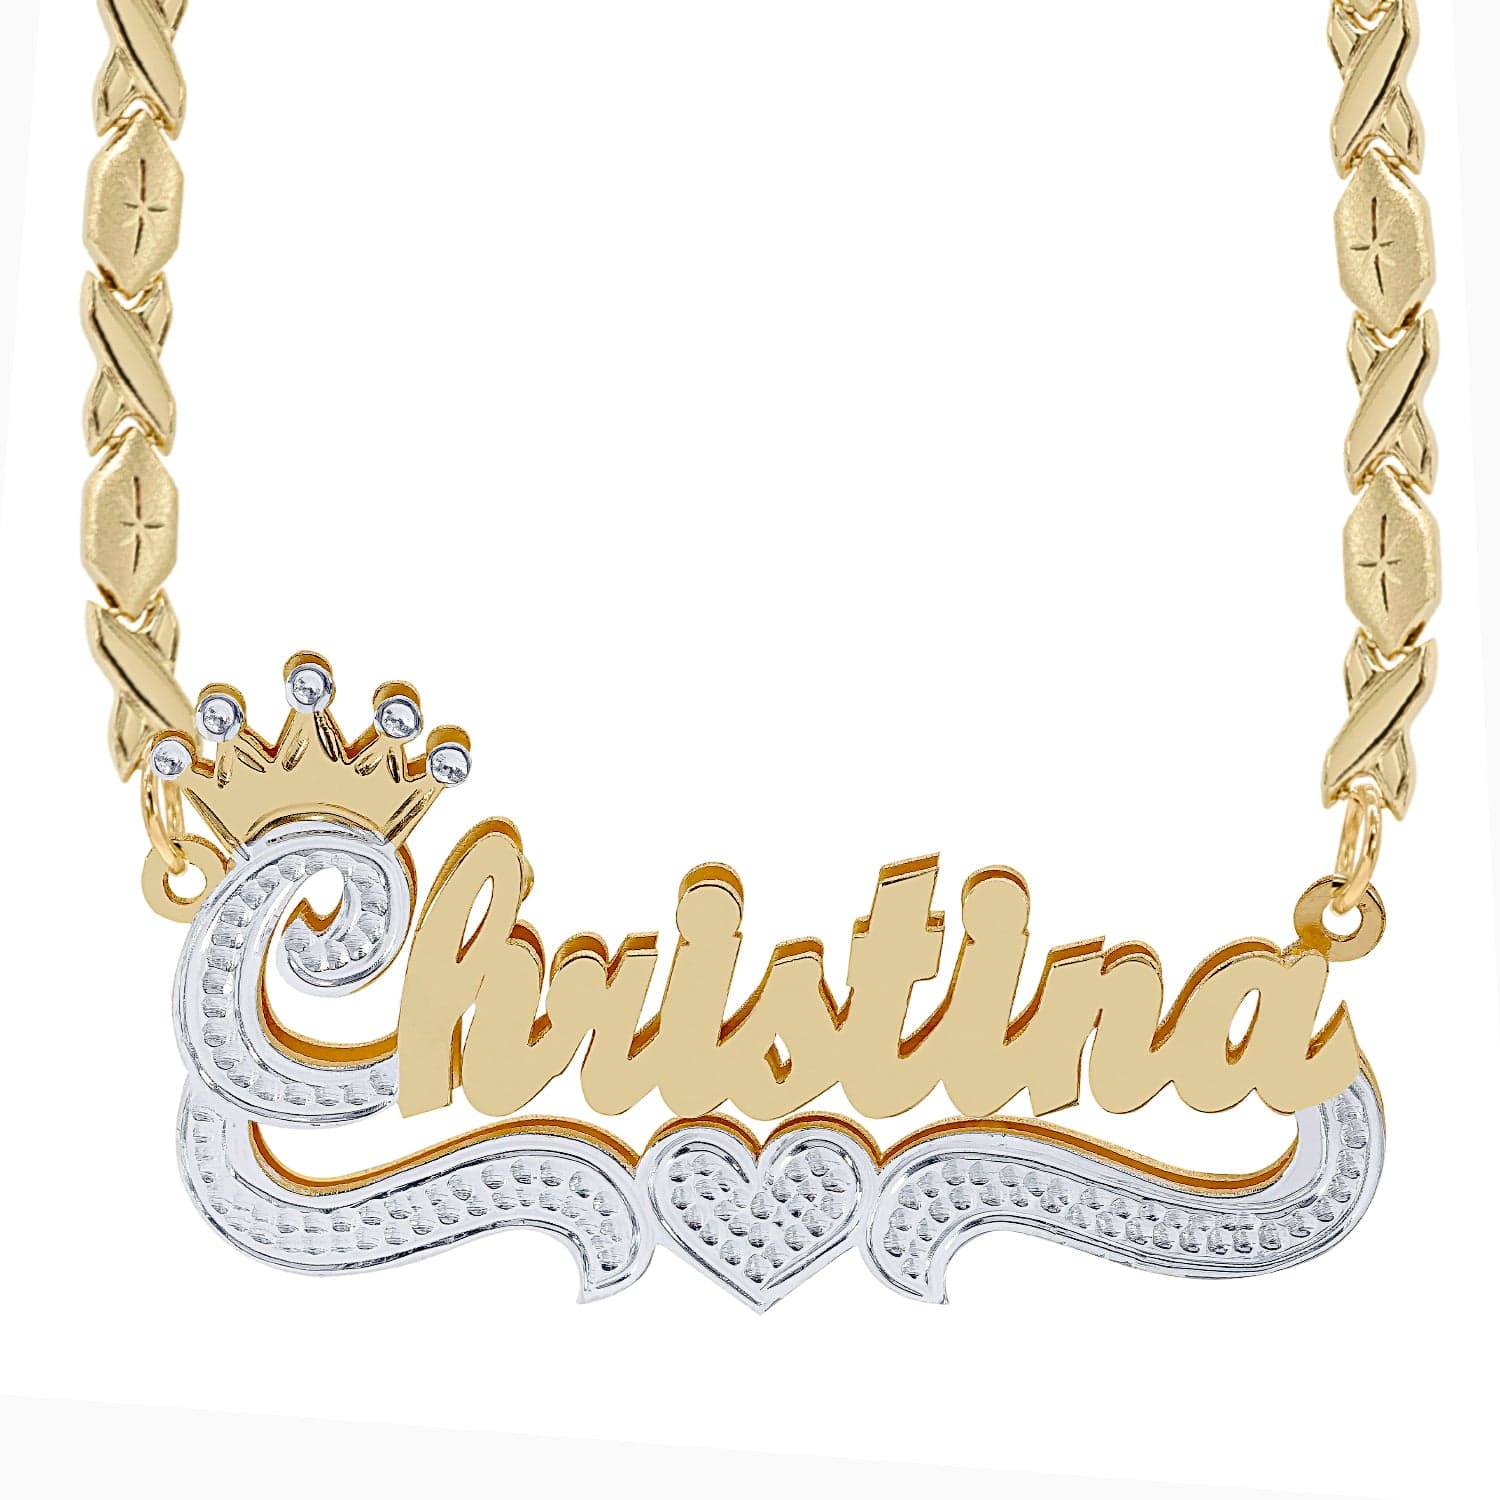 Two-Tone Sterling Silver / Xoxo Chain Double Plated Name Necklace "Christina" with Xoxo chain